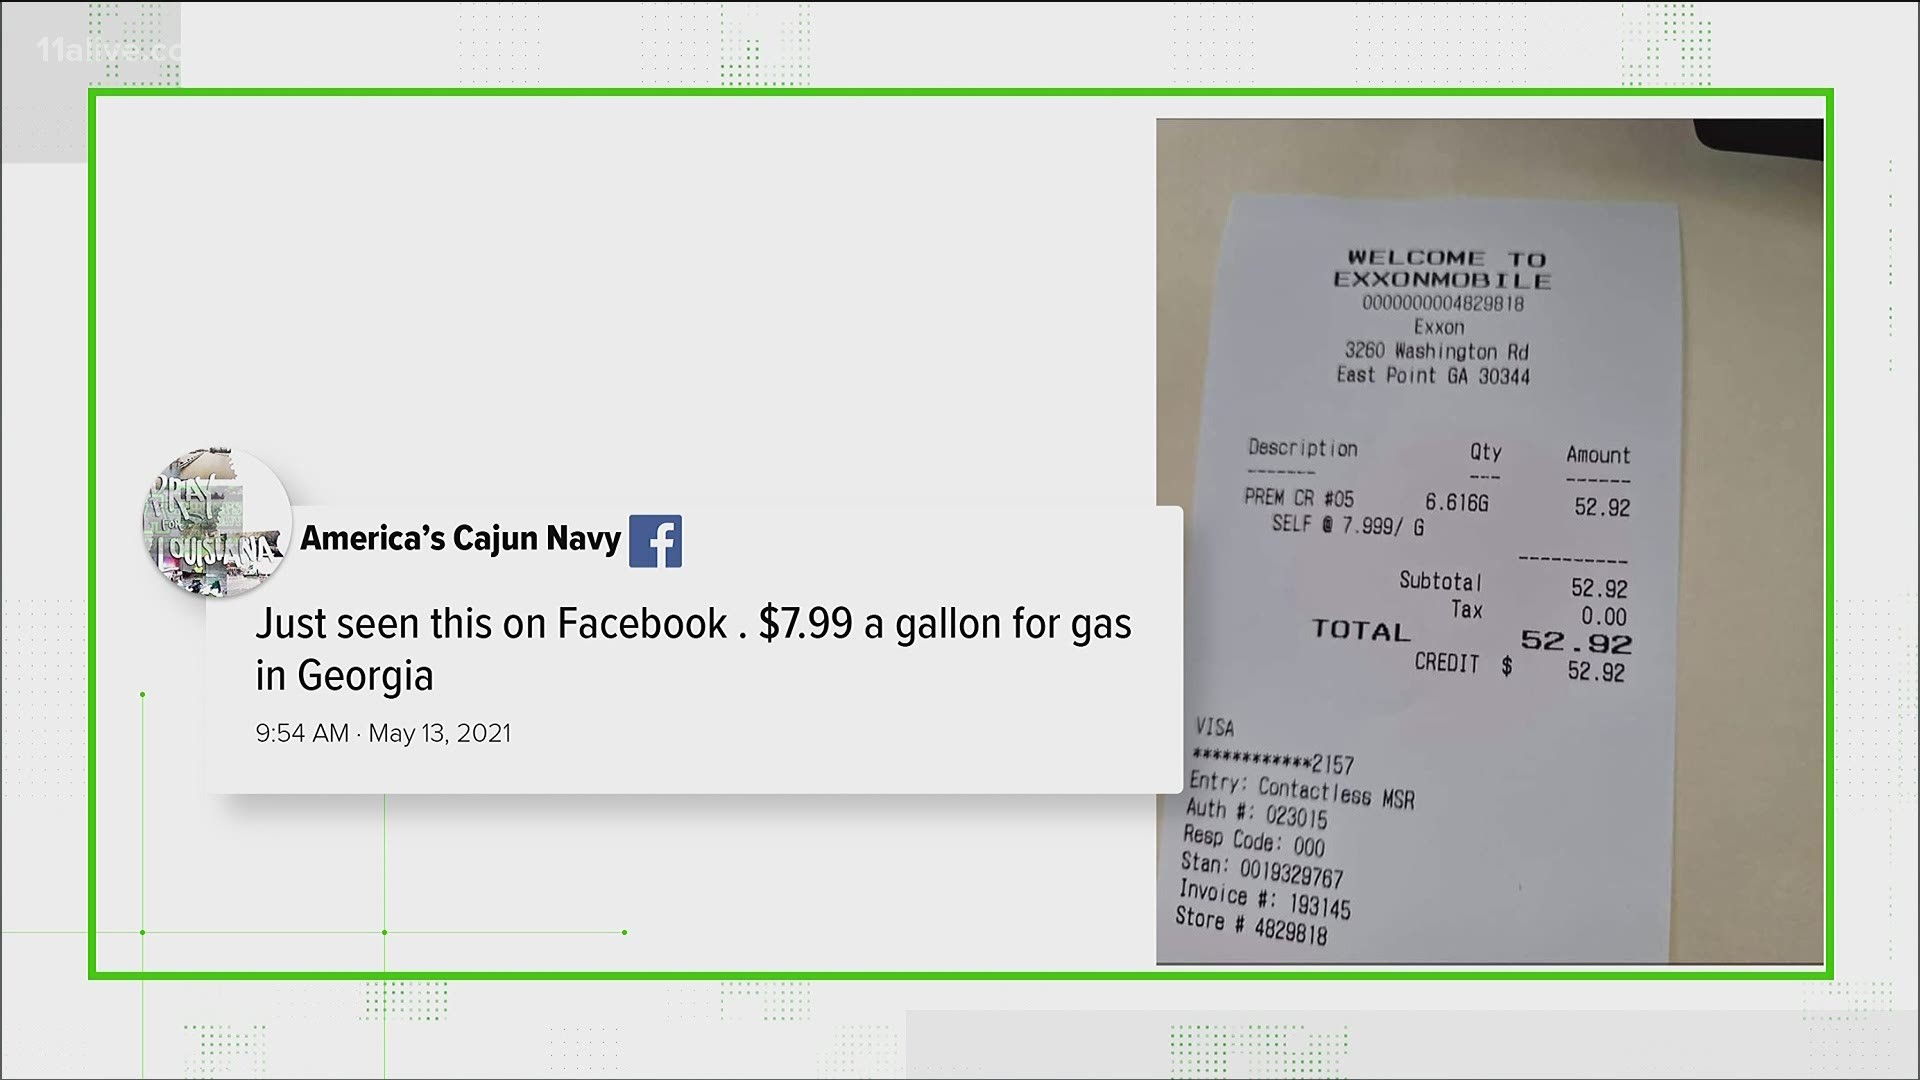 11Alive’s friends at PolitiFact tipped us off to a viral Facebook post about a gas station in East Point charging $7.99 a gallon.